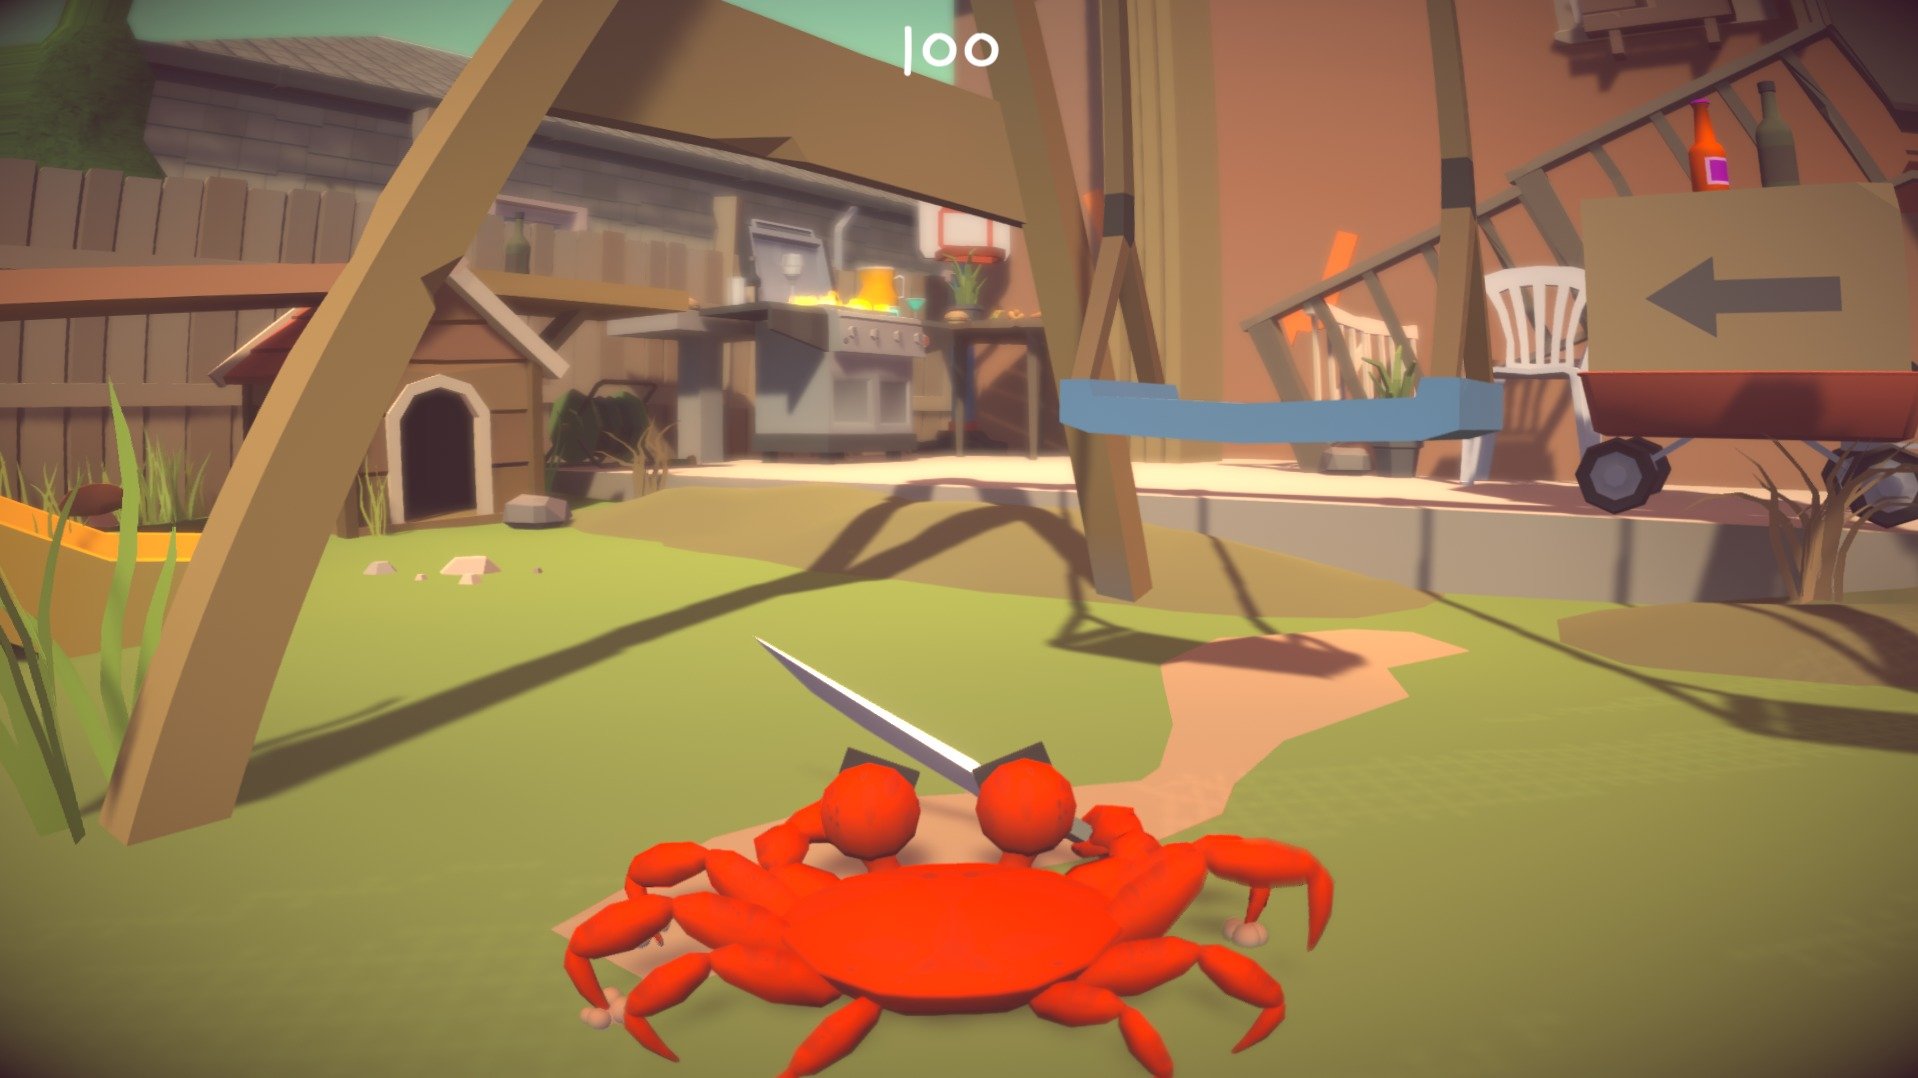 Knife 2 Meat U Is A Comedy Game For Those Who Want To Take A Break – It’s Short, Funny, And It’s Free!